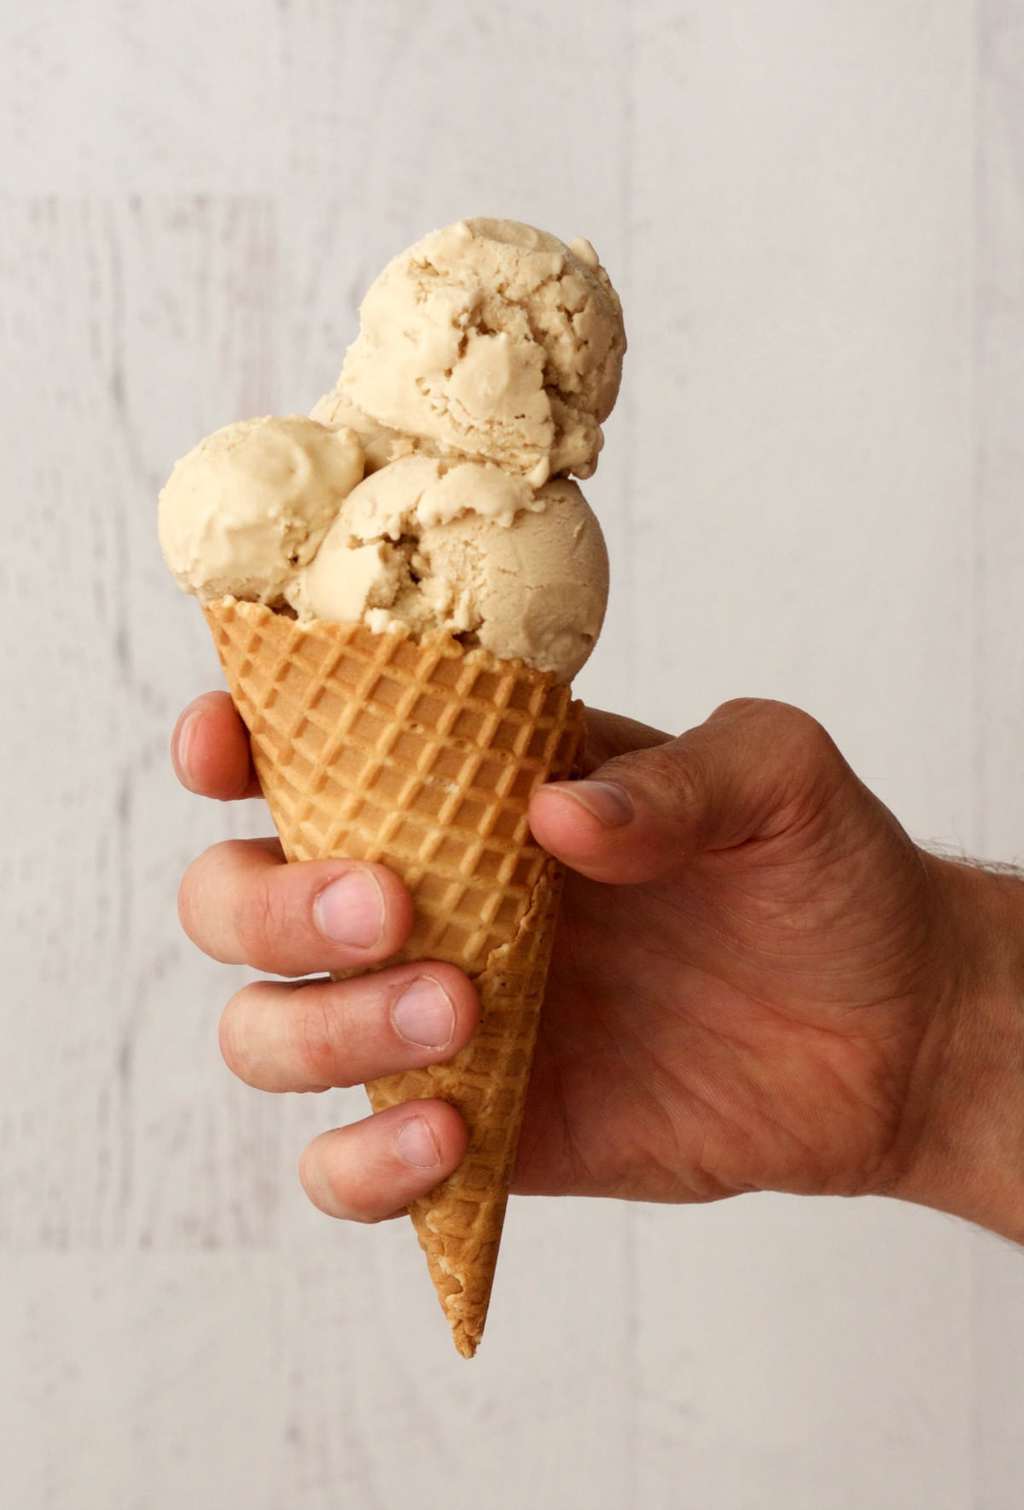 Salted caramel ice cream scoops in an ice cream cone. 